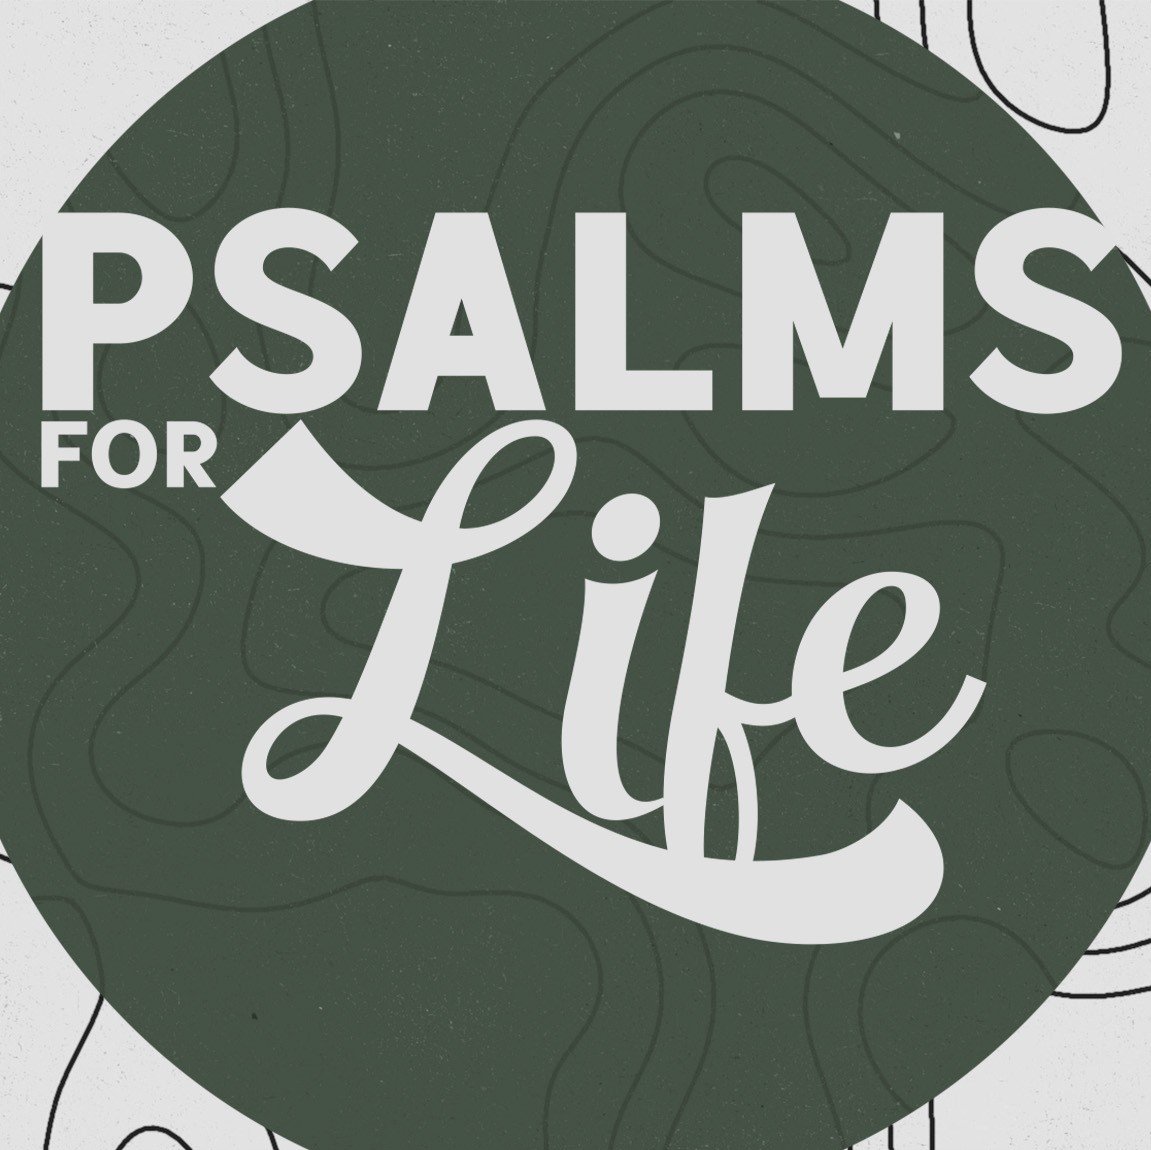 Psalms for Life